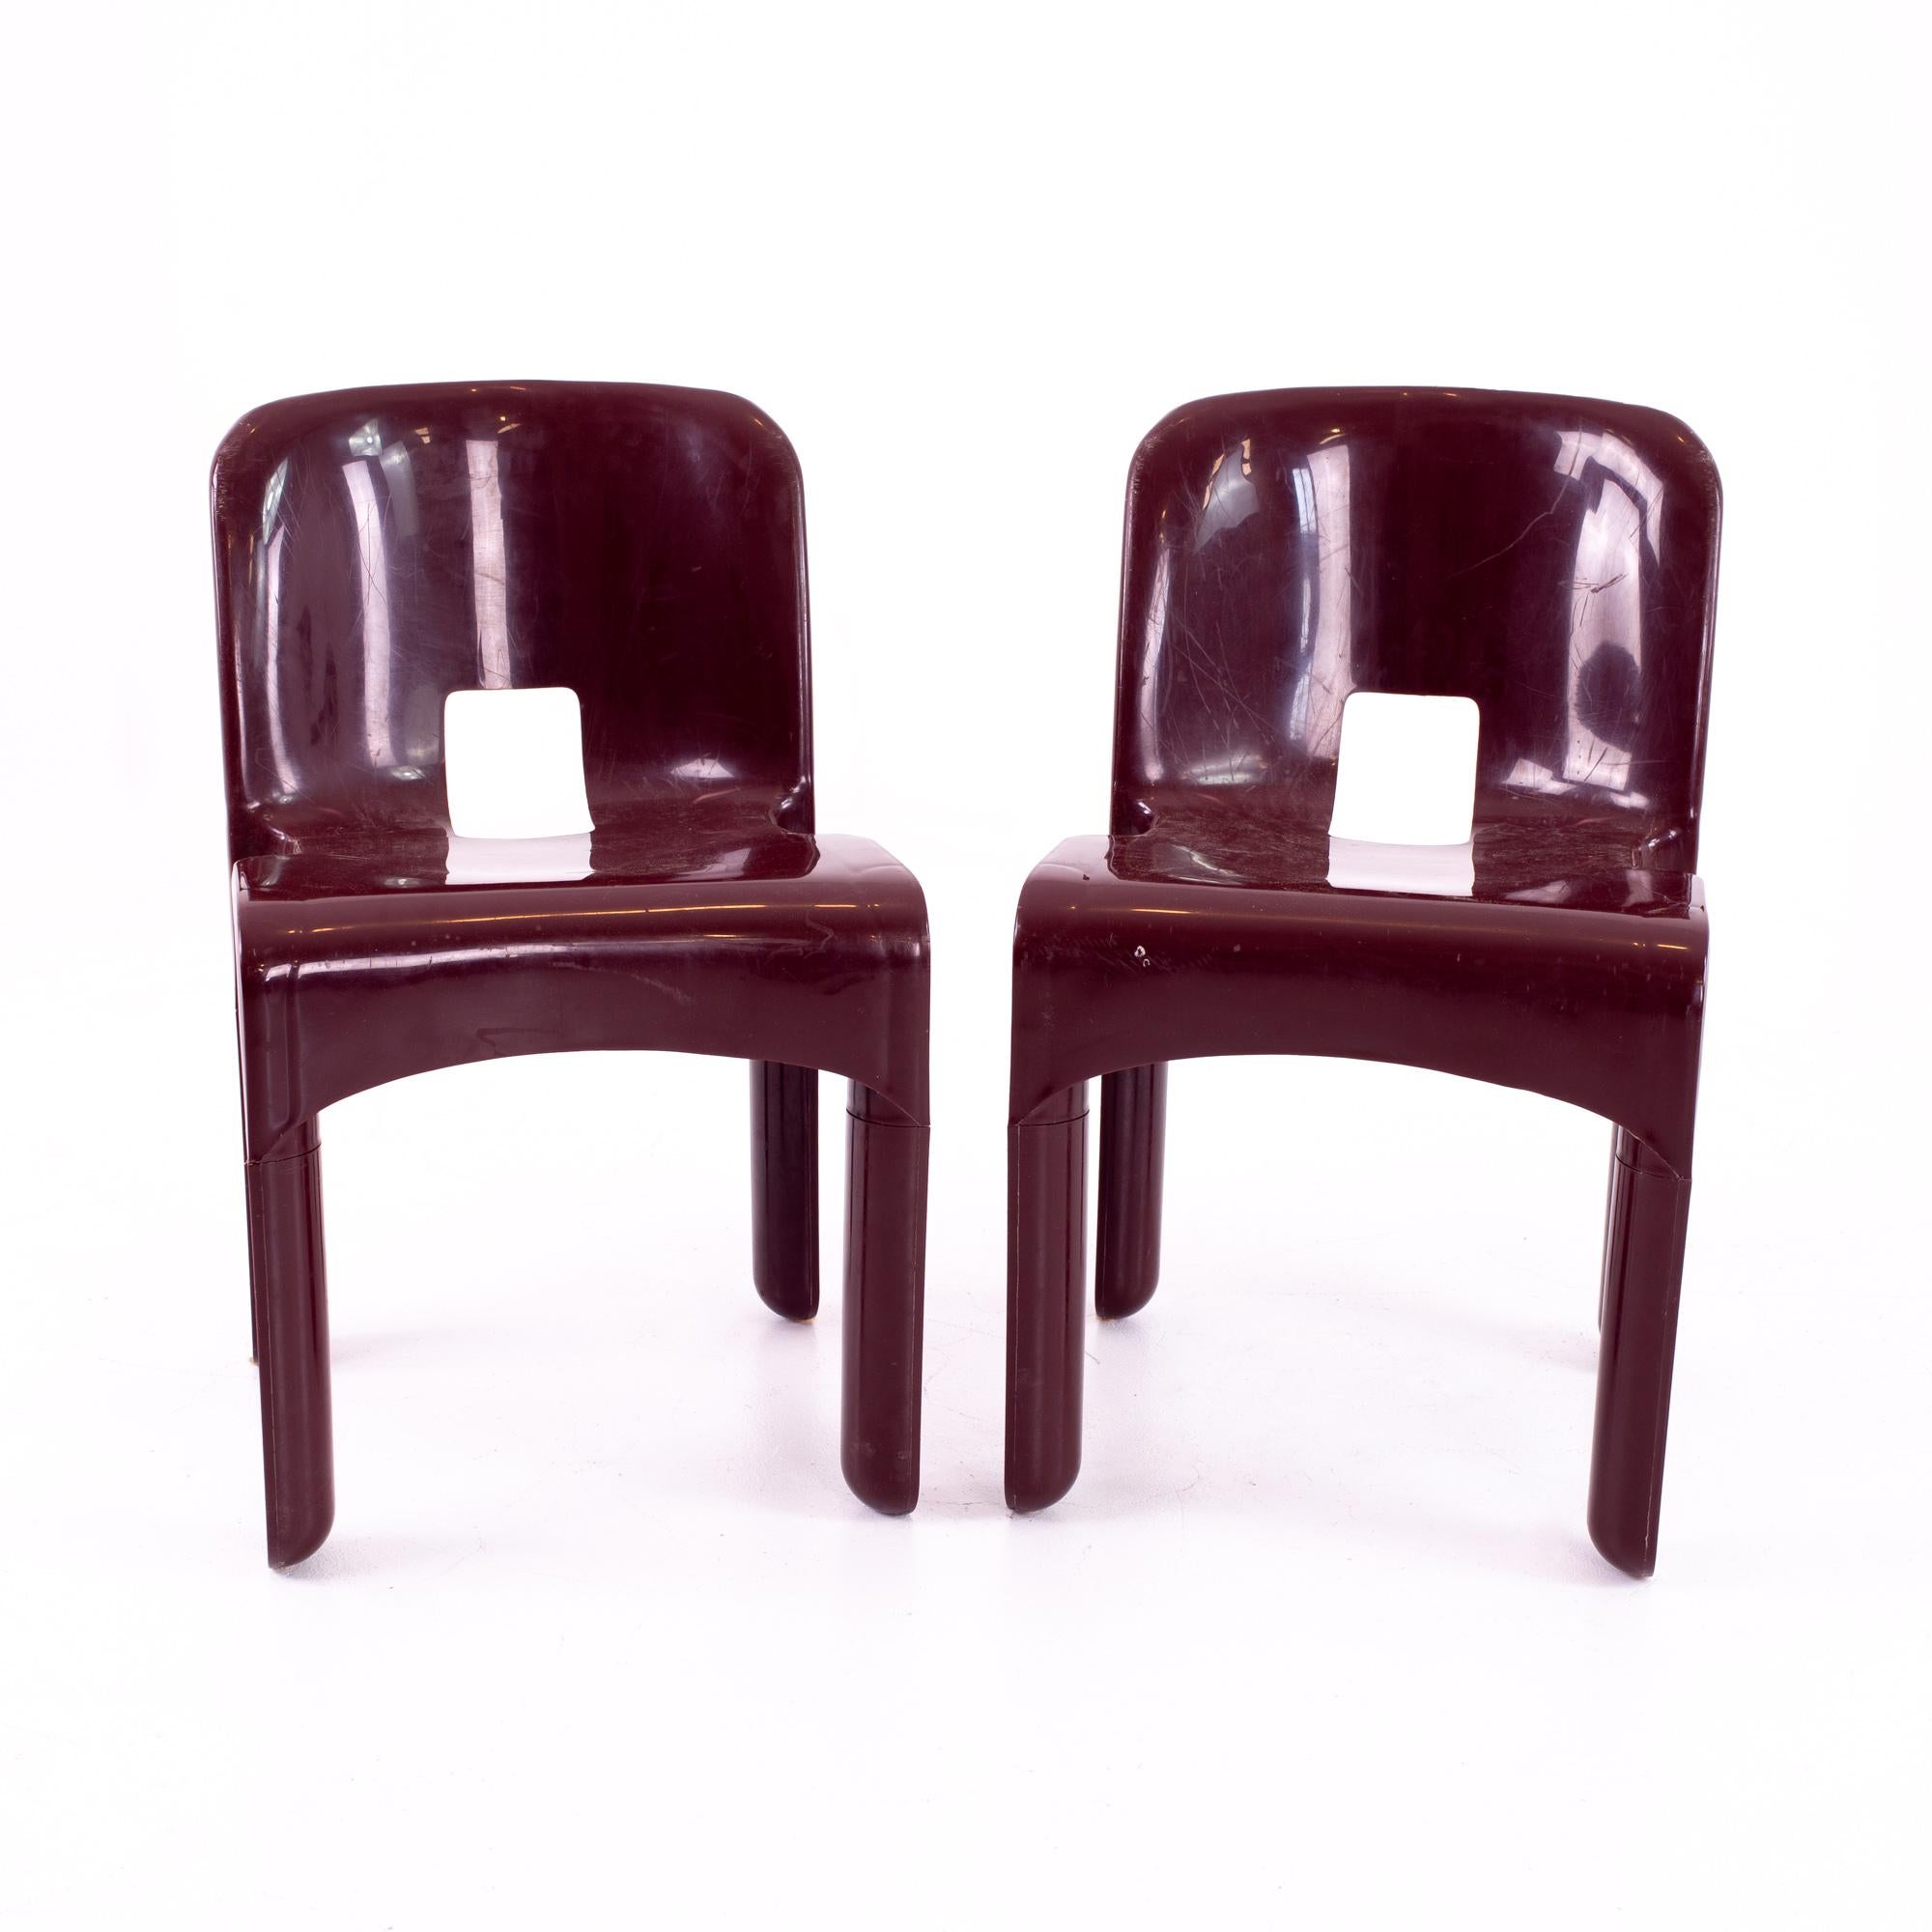 Joe Colombo Kartell Mid Century plastic chairs, pair
Each chair measures: 16.75 wide x 18.75 deep x 28.25 high with a seat height of 17 inches
This set is available in what we call restored vintage condition. Upon purchase, it is thoroughly cleaned